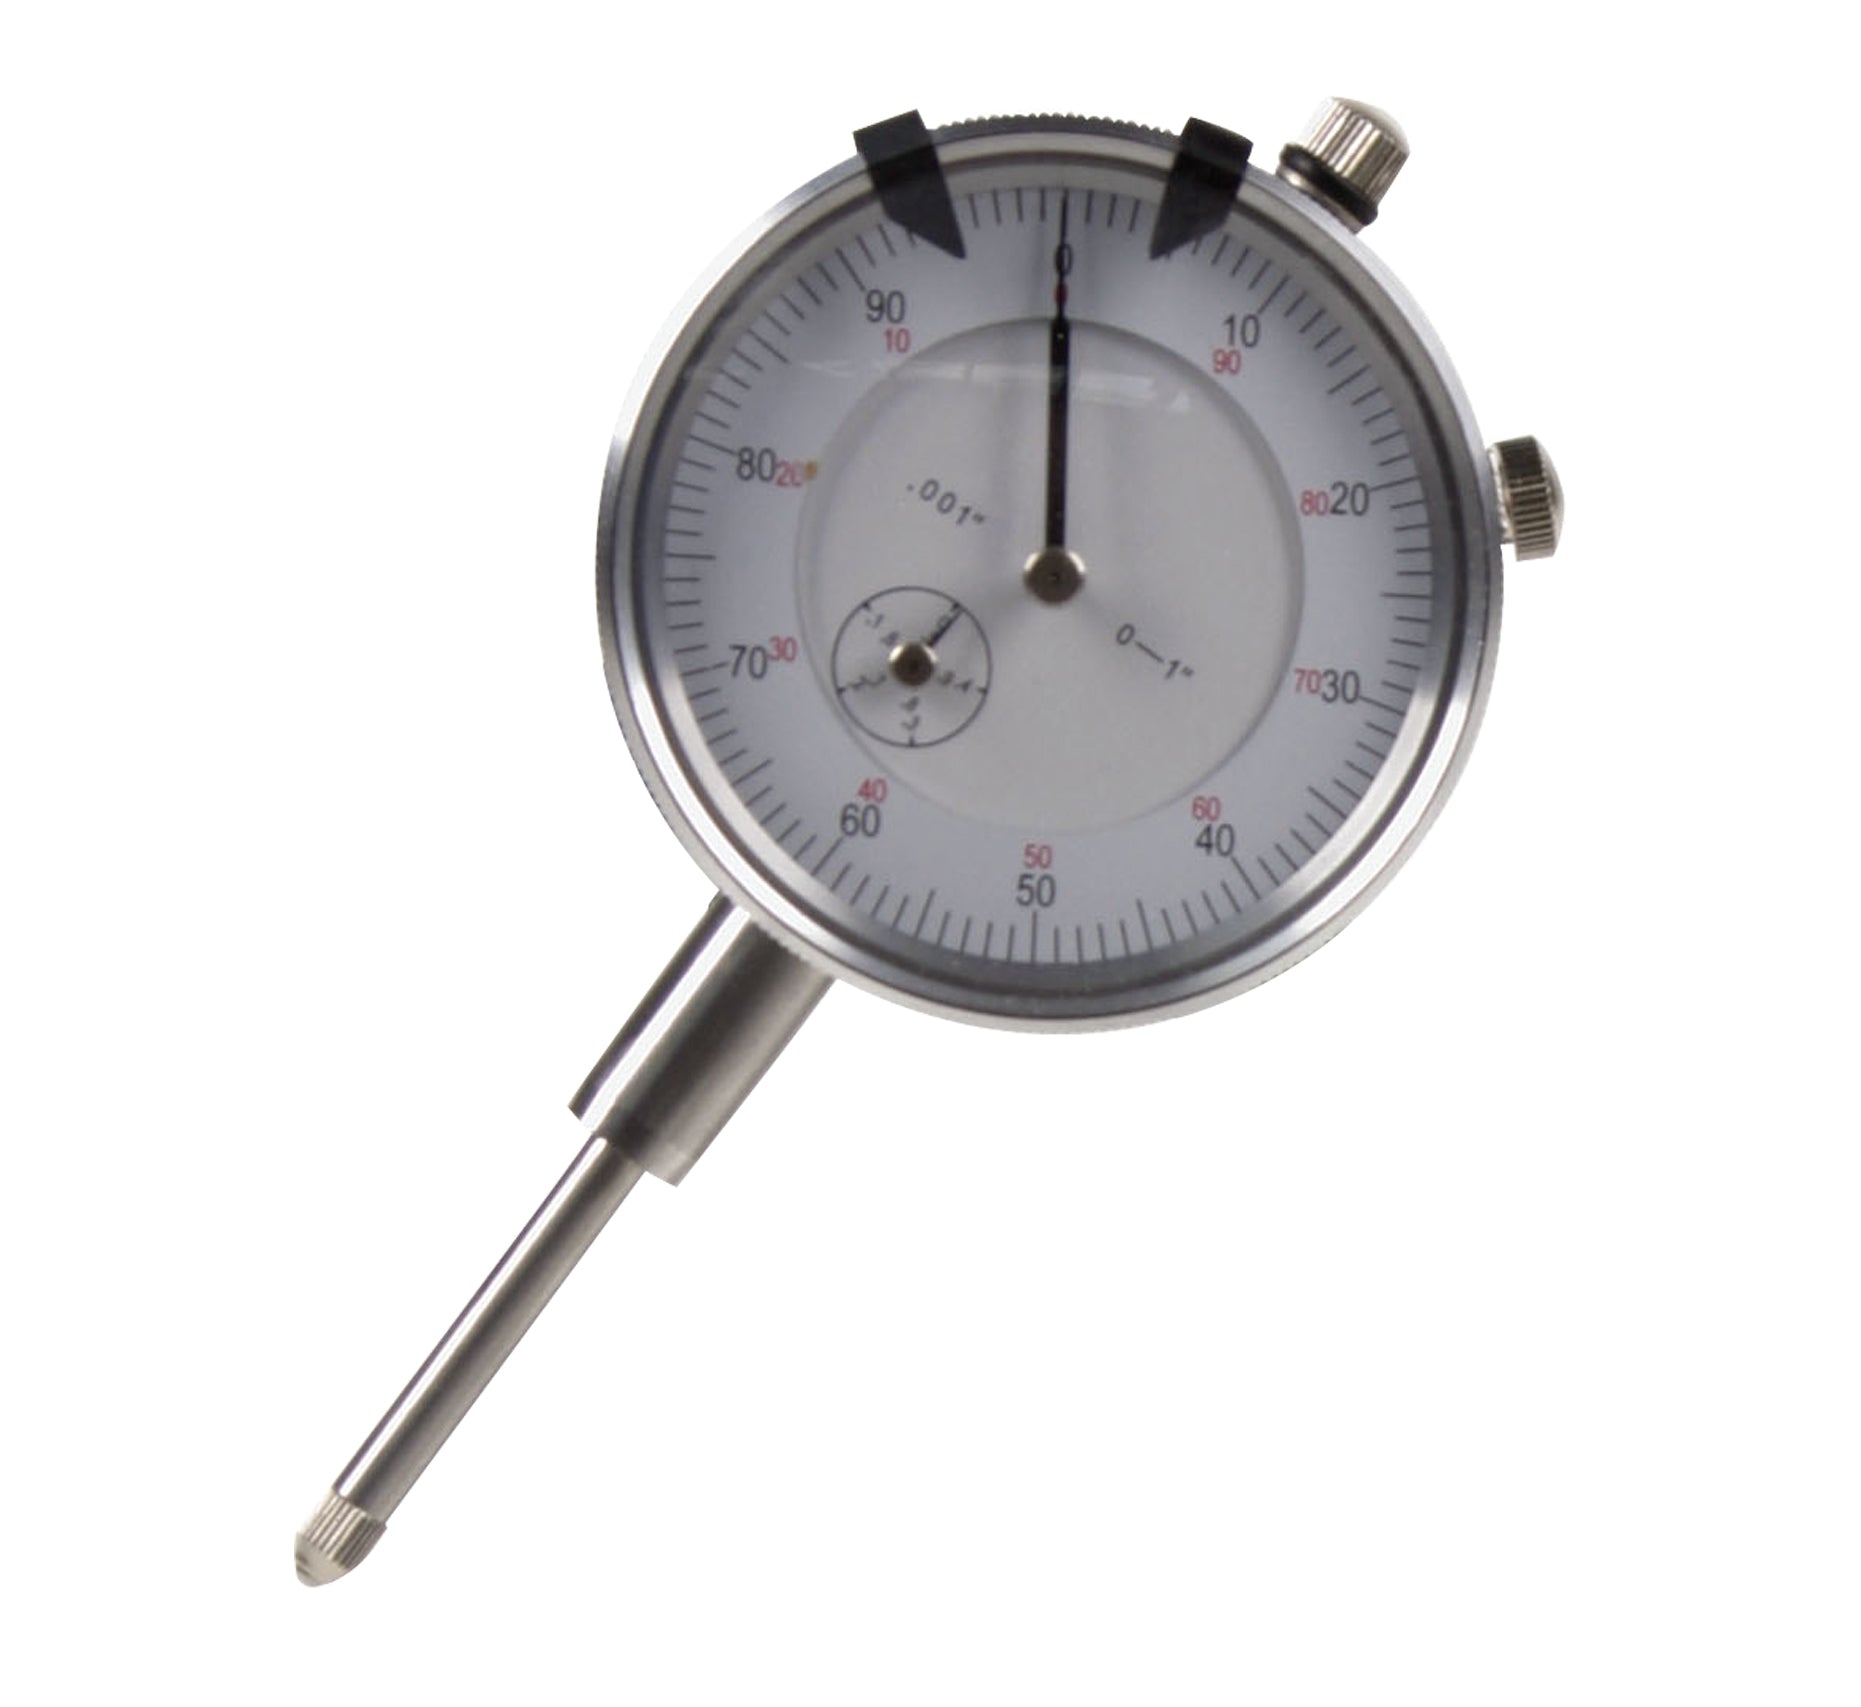 Wayco 1" Dial Indicator Imperial x .001" Increments